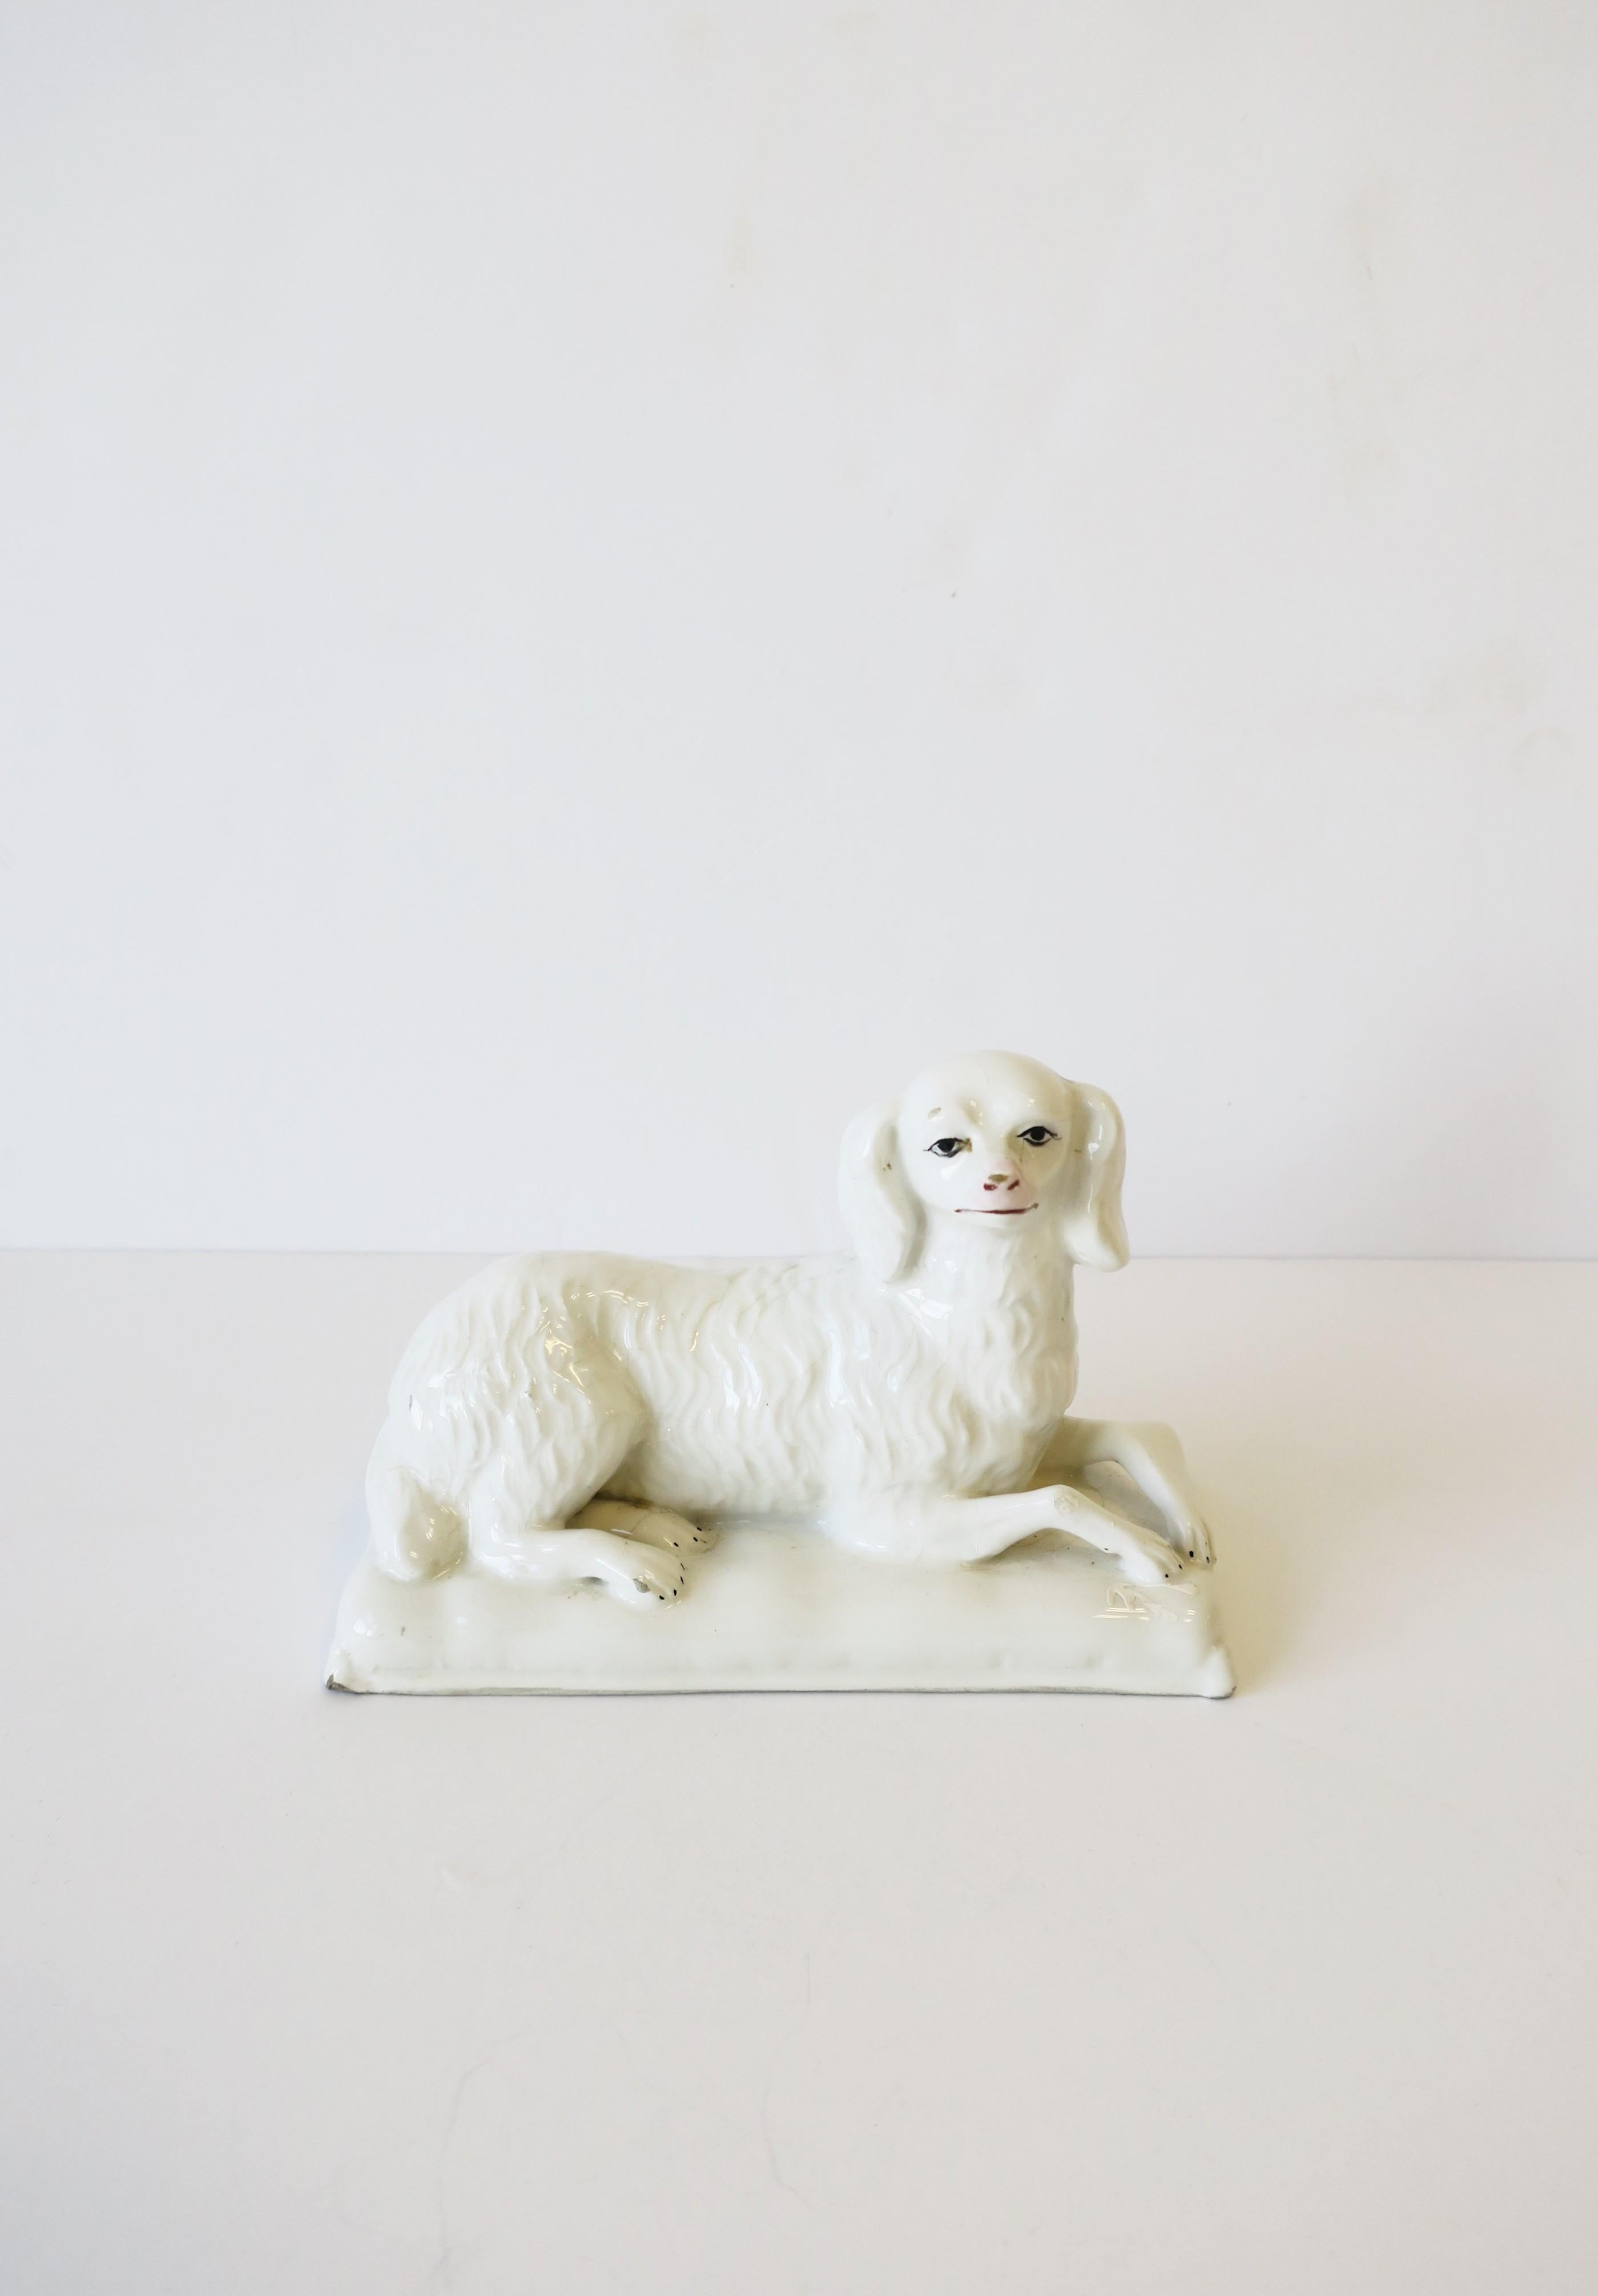 A mid-20th century Italian white porcelain decorative dog sculpture seated on a pillow, marked 